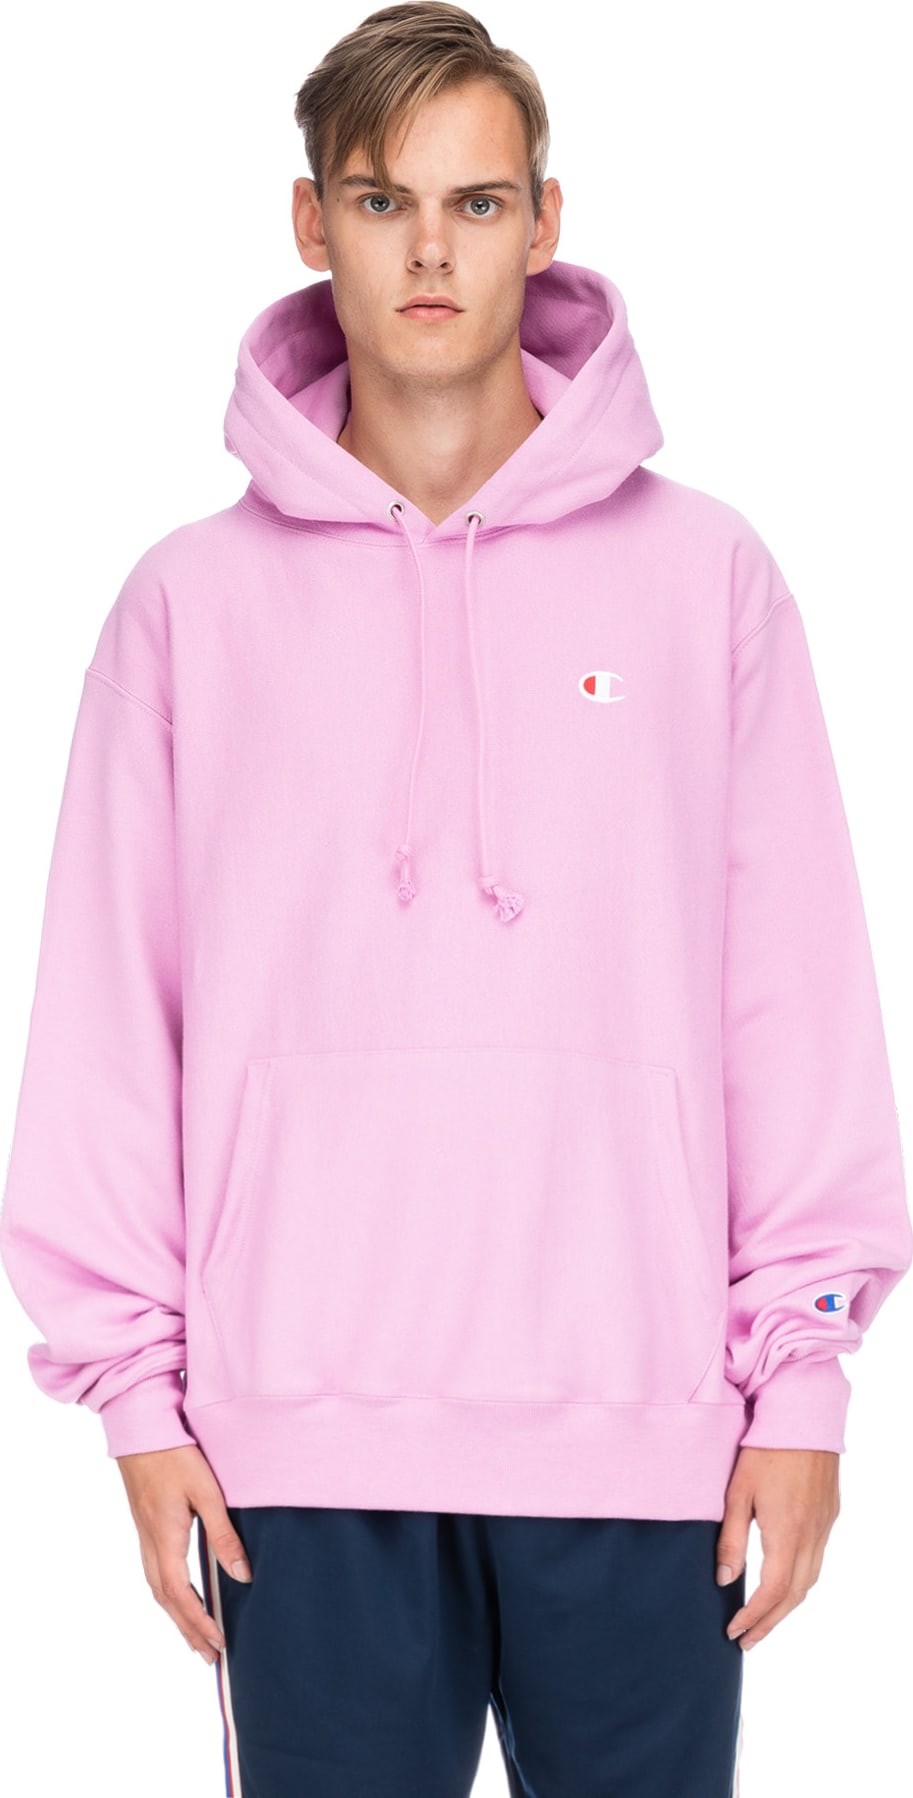 orchid champion hoodie